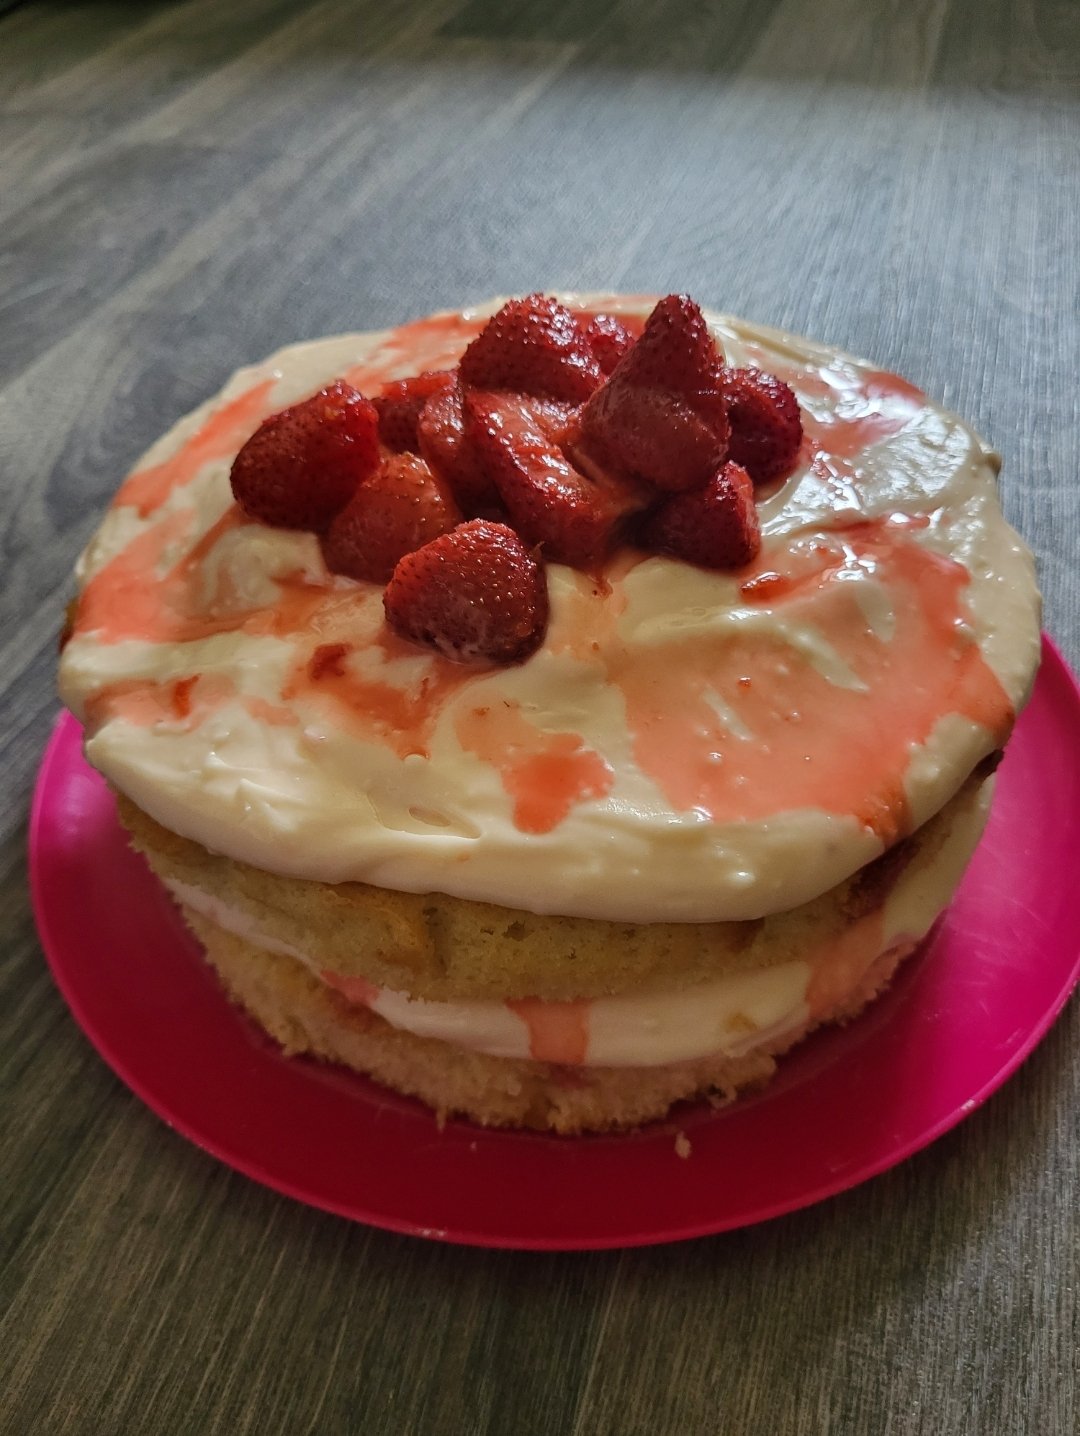 A 2 layer sponge cake with buttercream and roasted Strawberries on the top. In between thr layers of cake more buttercream icing is visible with hints of strawberry juice oozing onto the sponge. It is plated on a vibrant pink plate